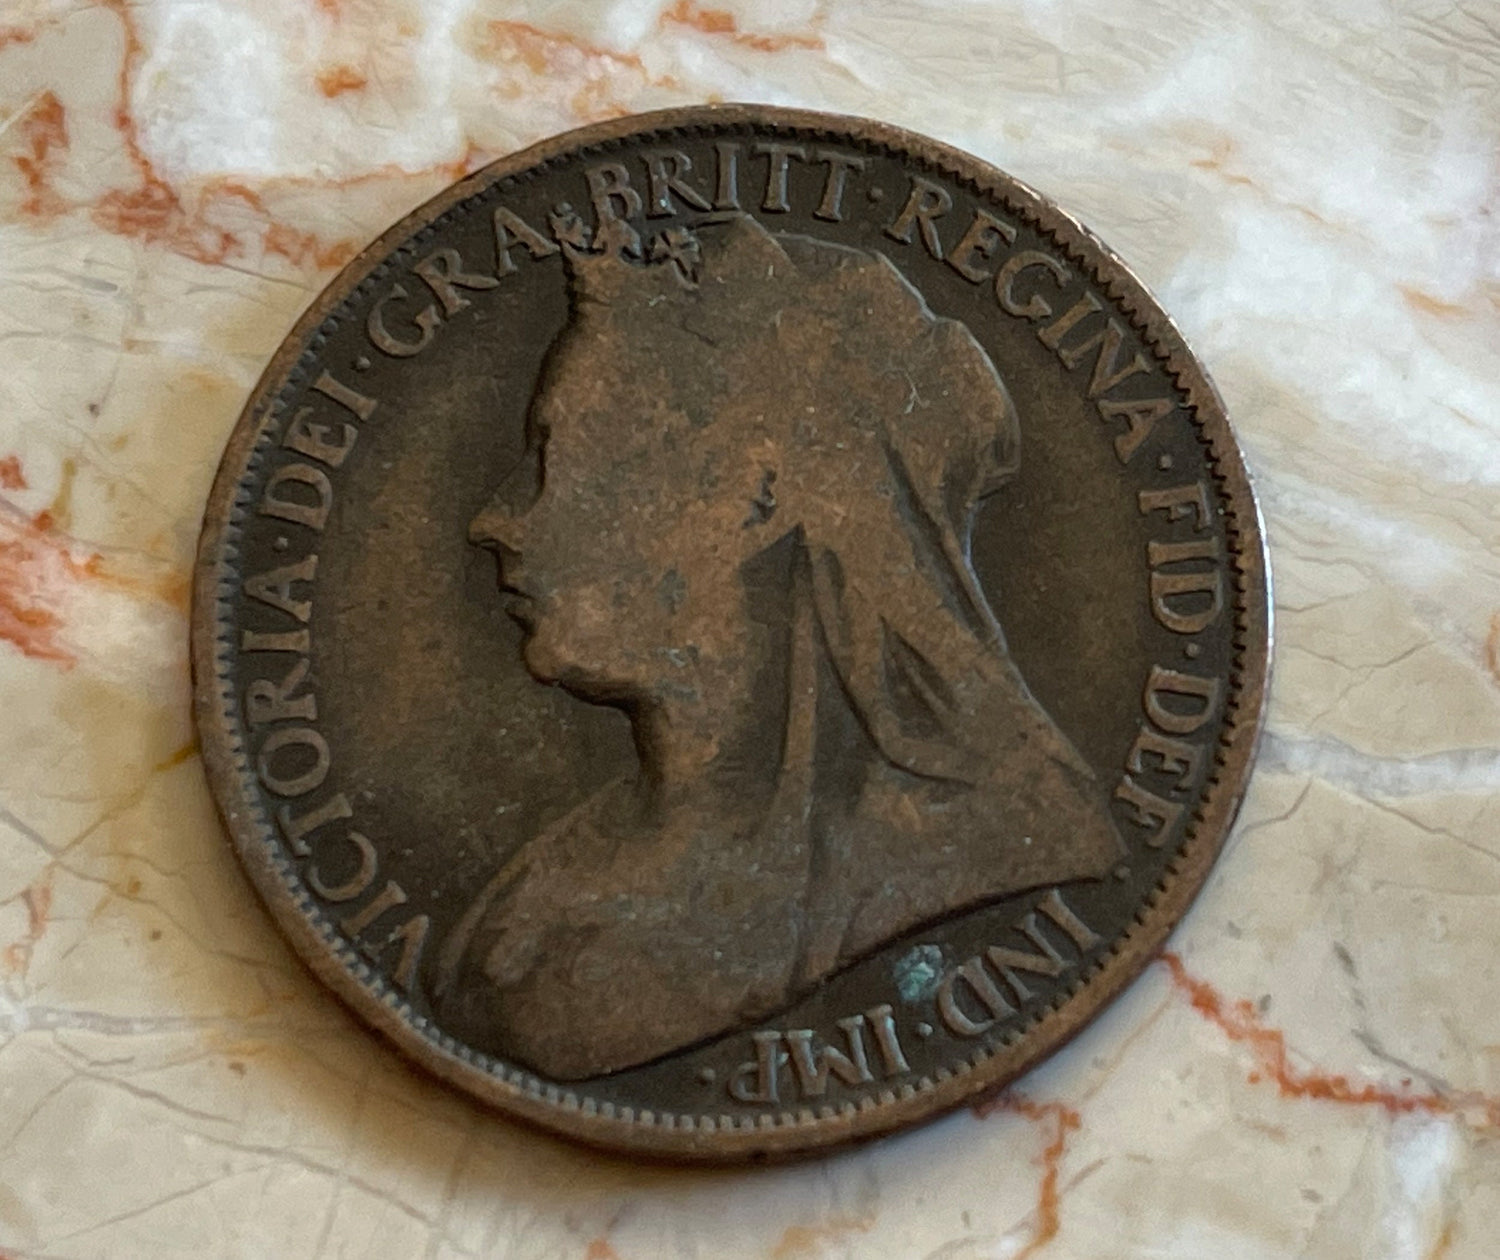 Queen Victoria (3rd Portrait) & Britannia Great Britain 1 Penny Authentic Coin Money Cent for Jewelry -- Condition is Only FAIR